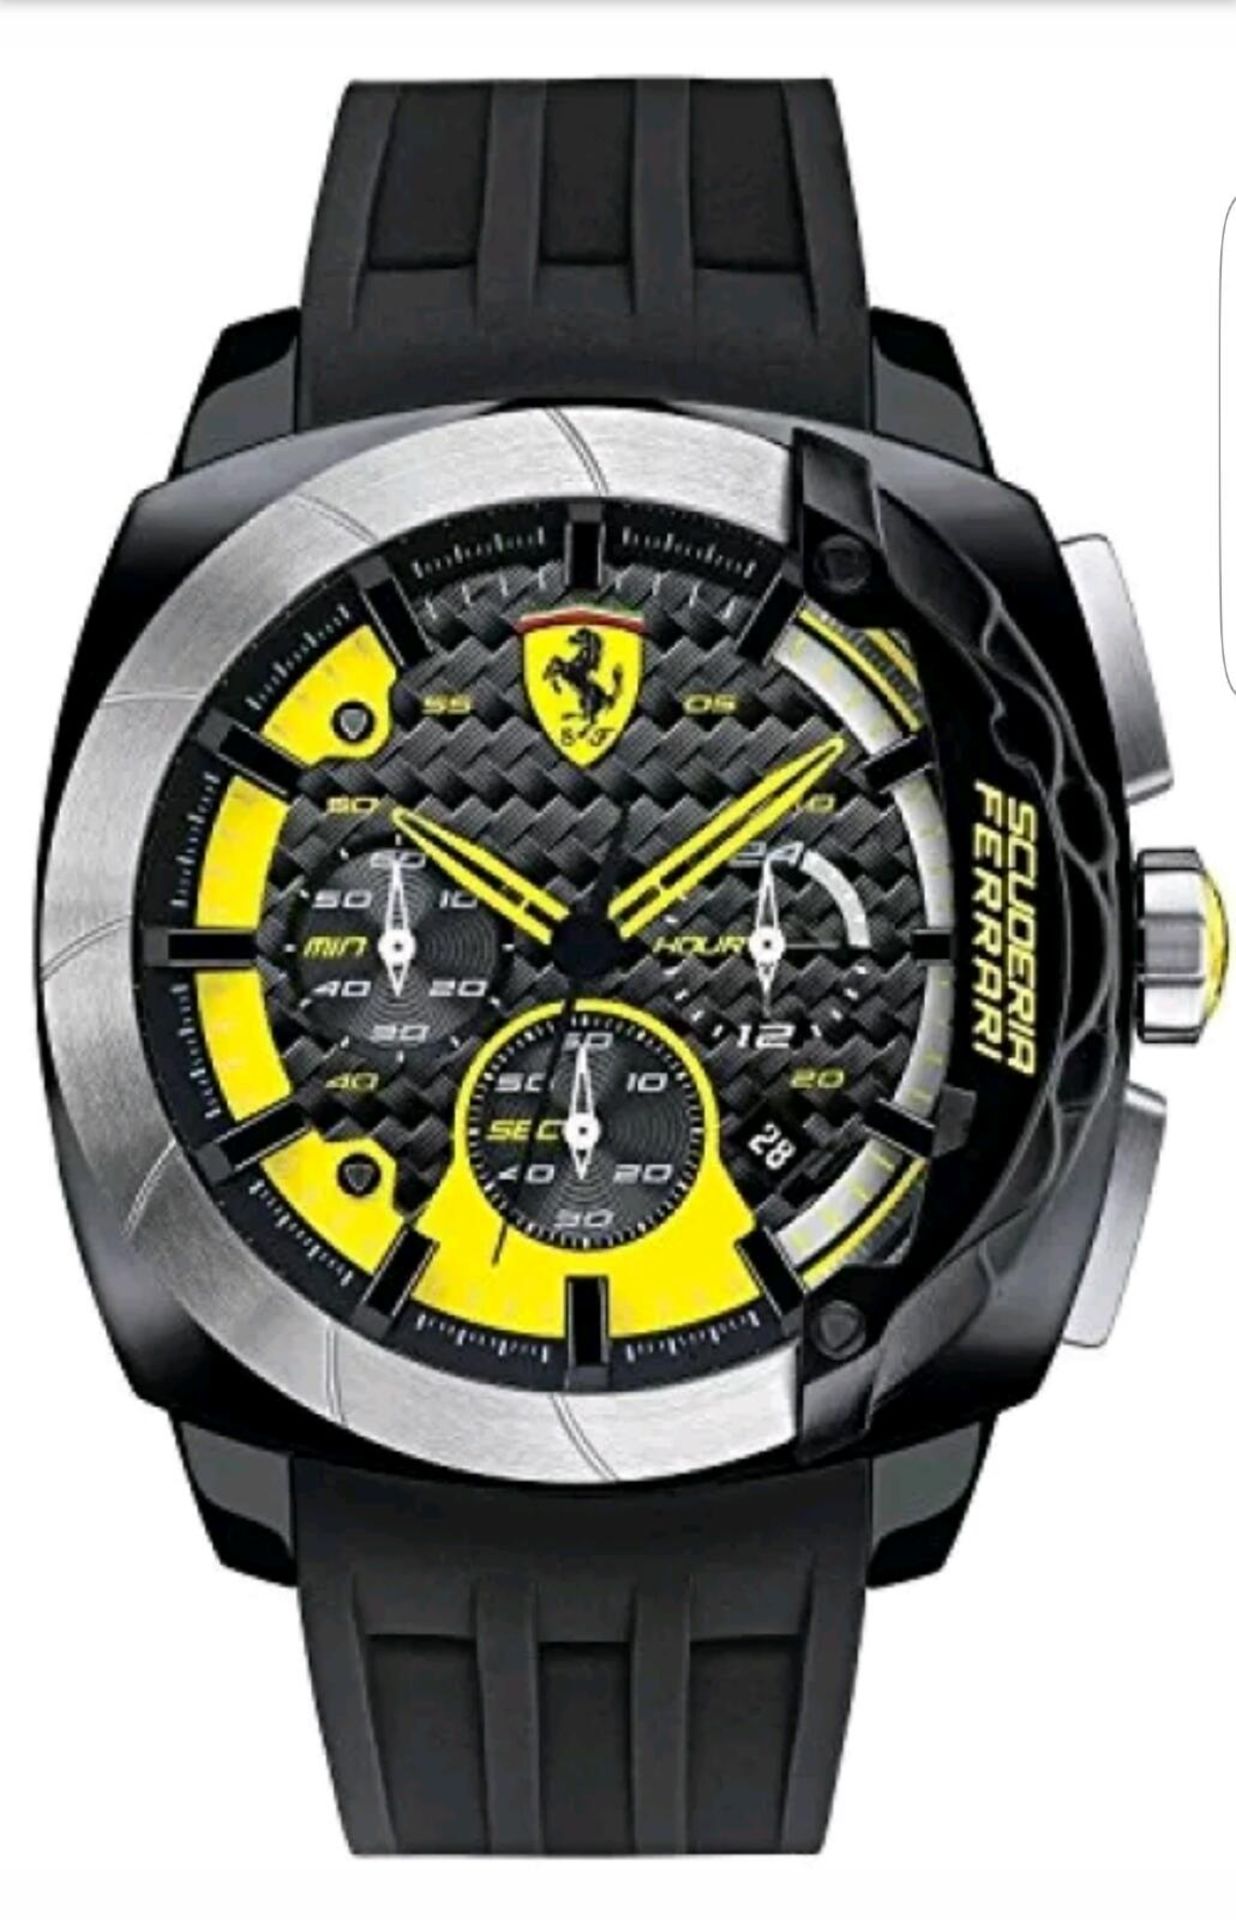 BRAND NEW GENTS FERRARI WATCH, 0830206, COMPLETE WITH ORIGINAL BOX AND MANUAL - RRP £499